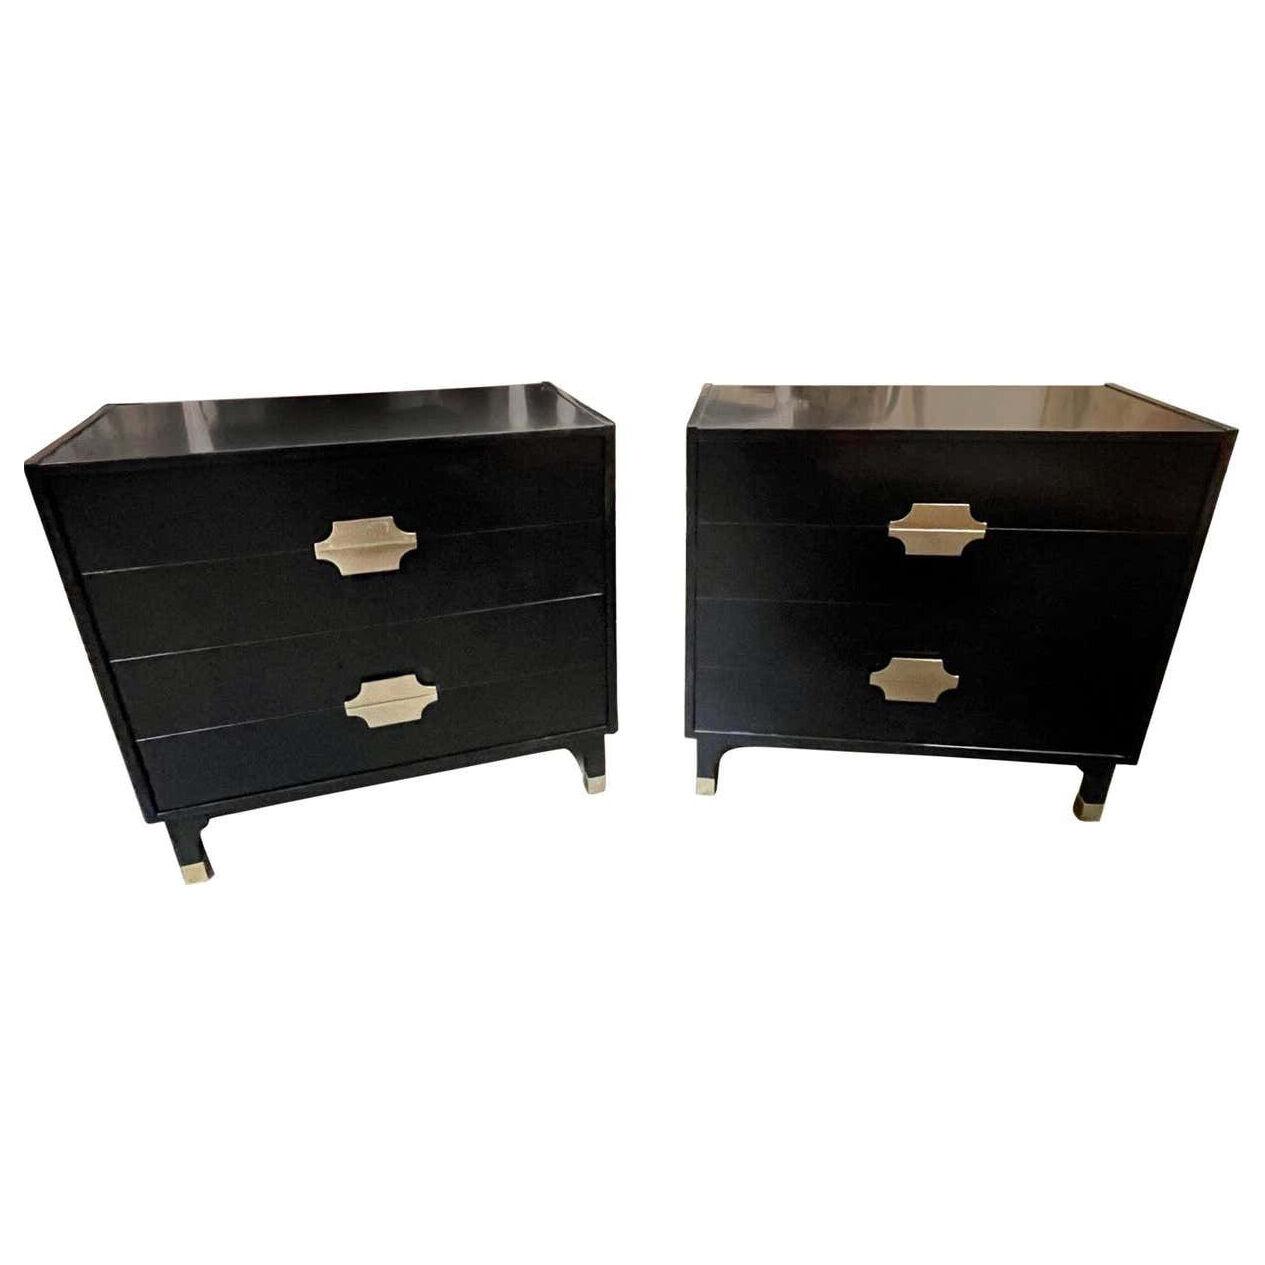 Modern Black Lacquered Bedside Tables from Italy